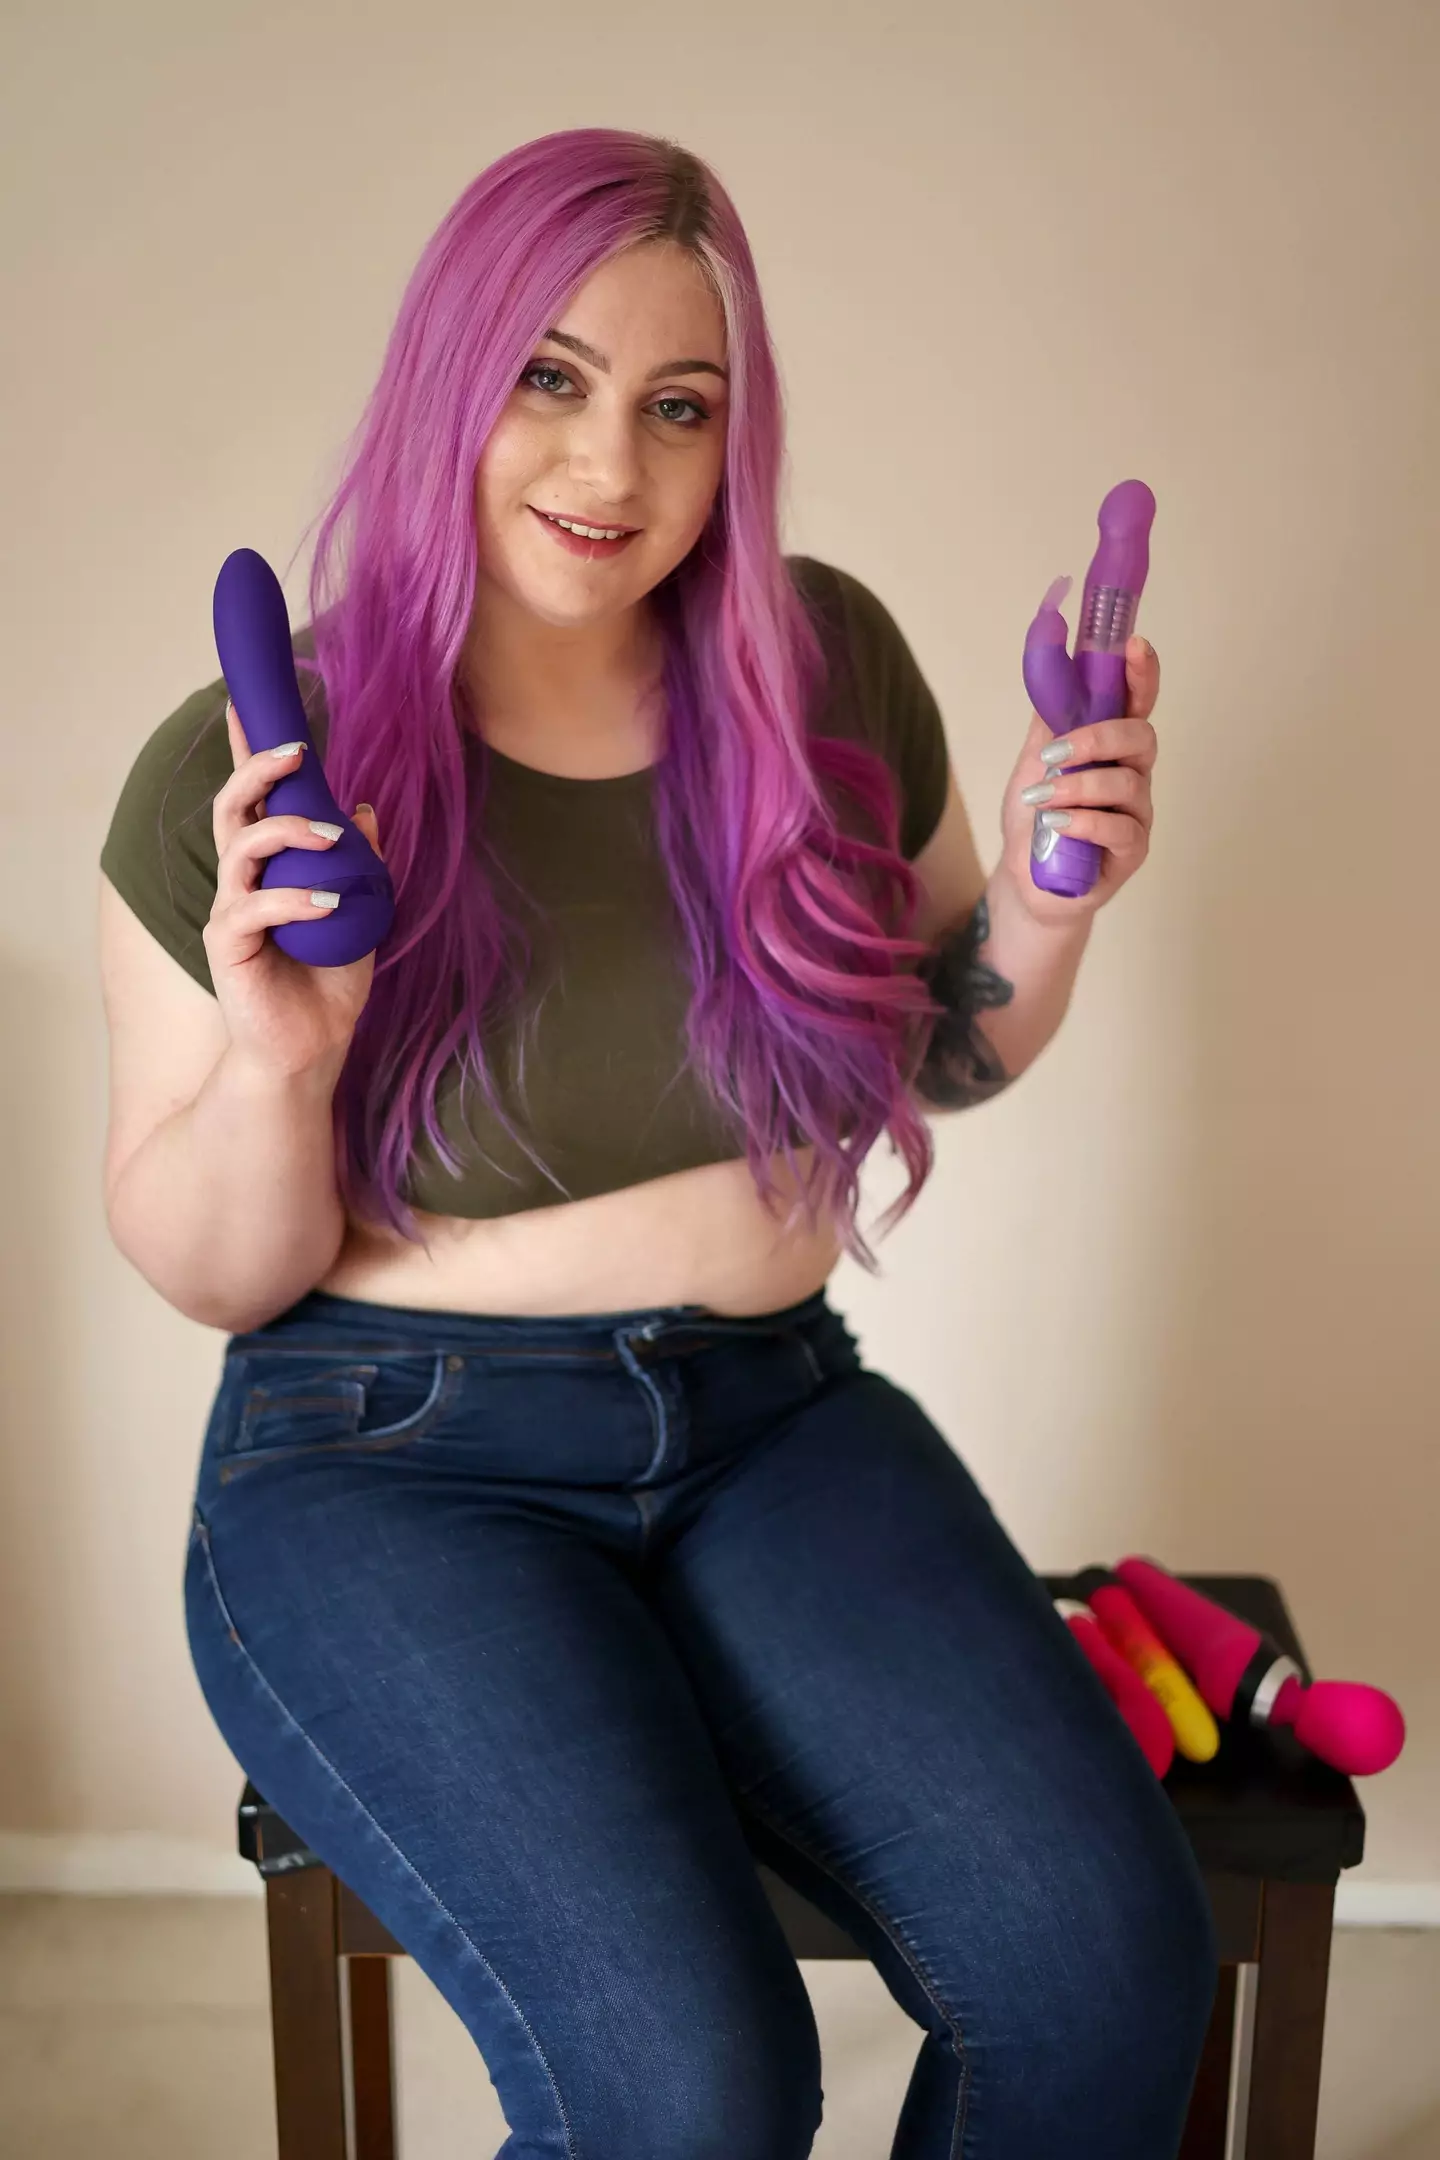 Jodie tests sex toys for a living.